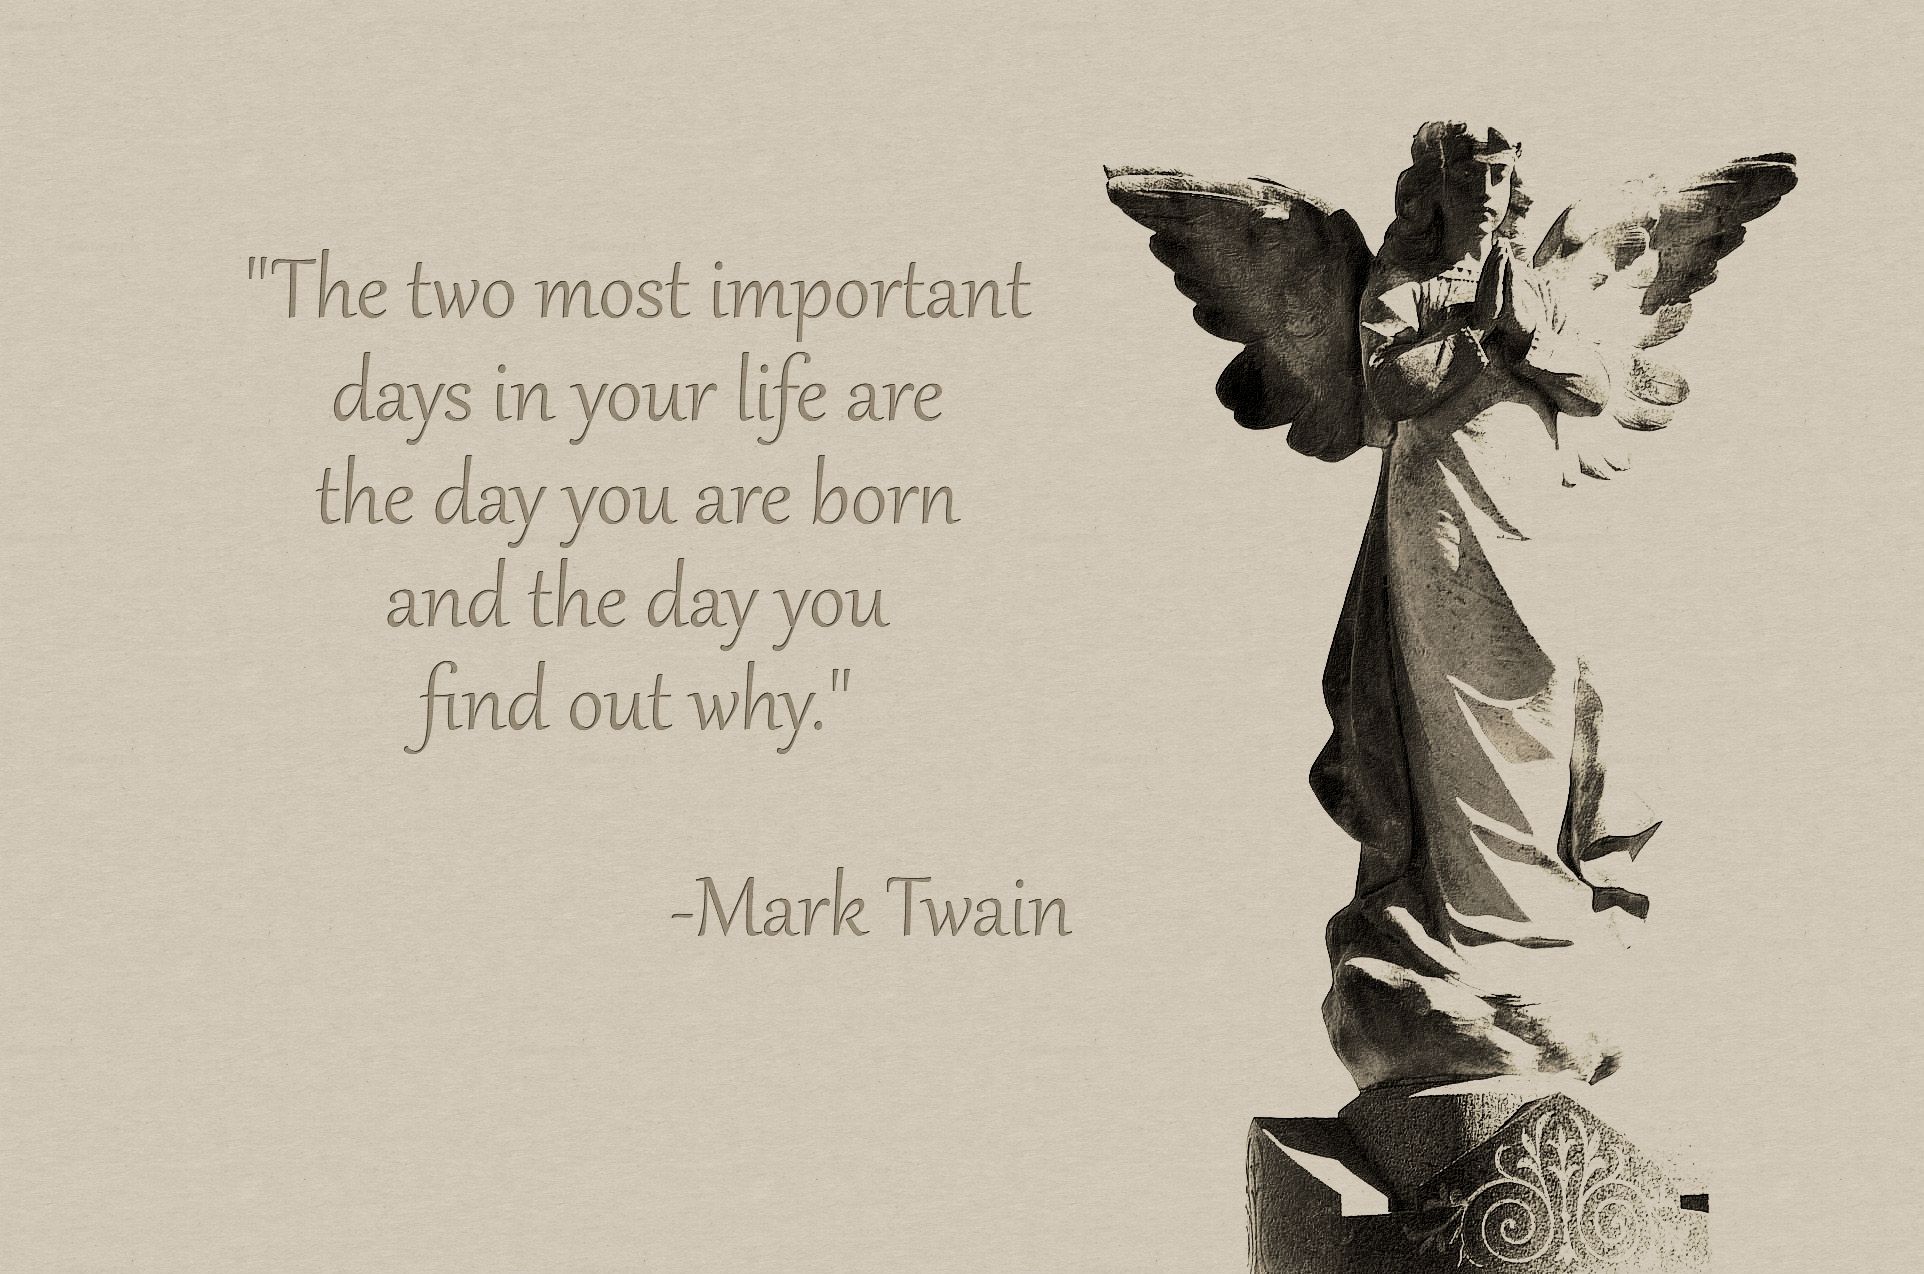 The two most important days in your life Twain HD Wallpaper